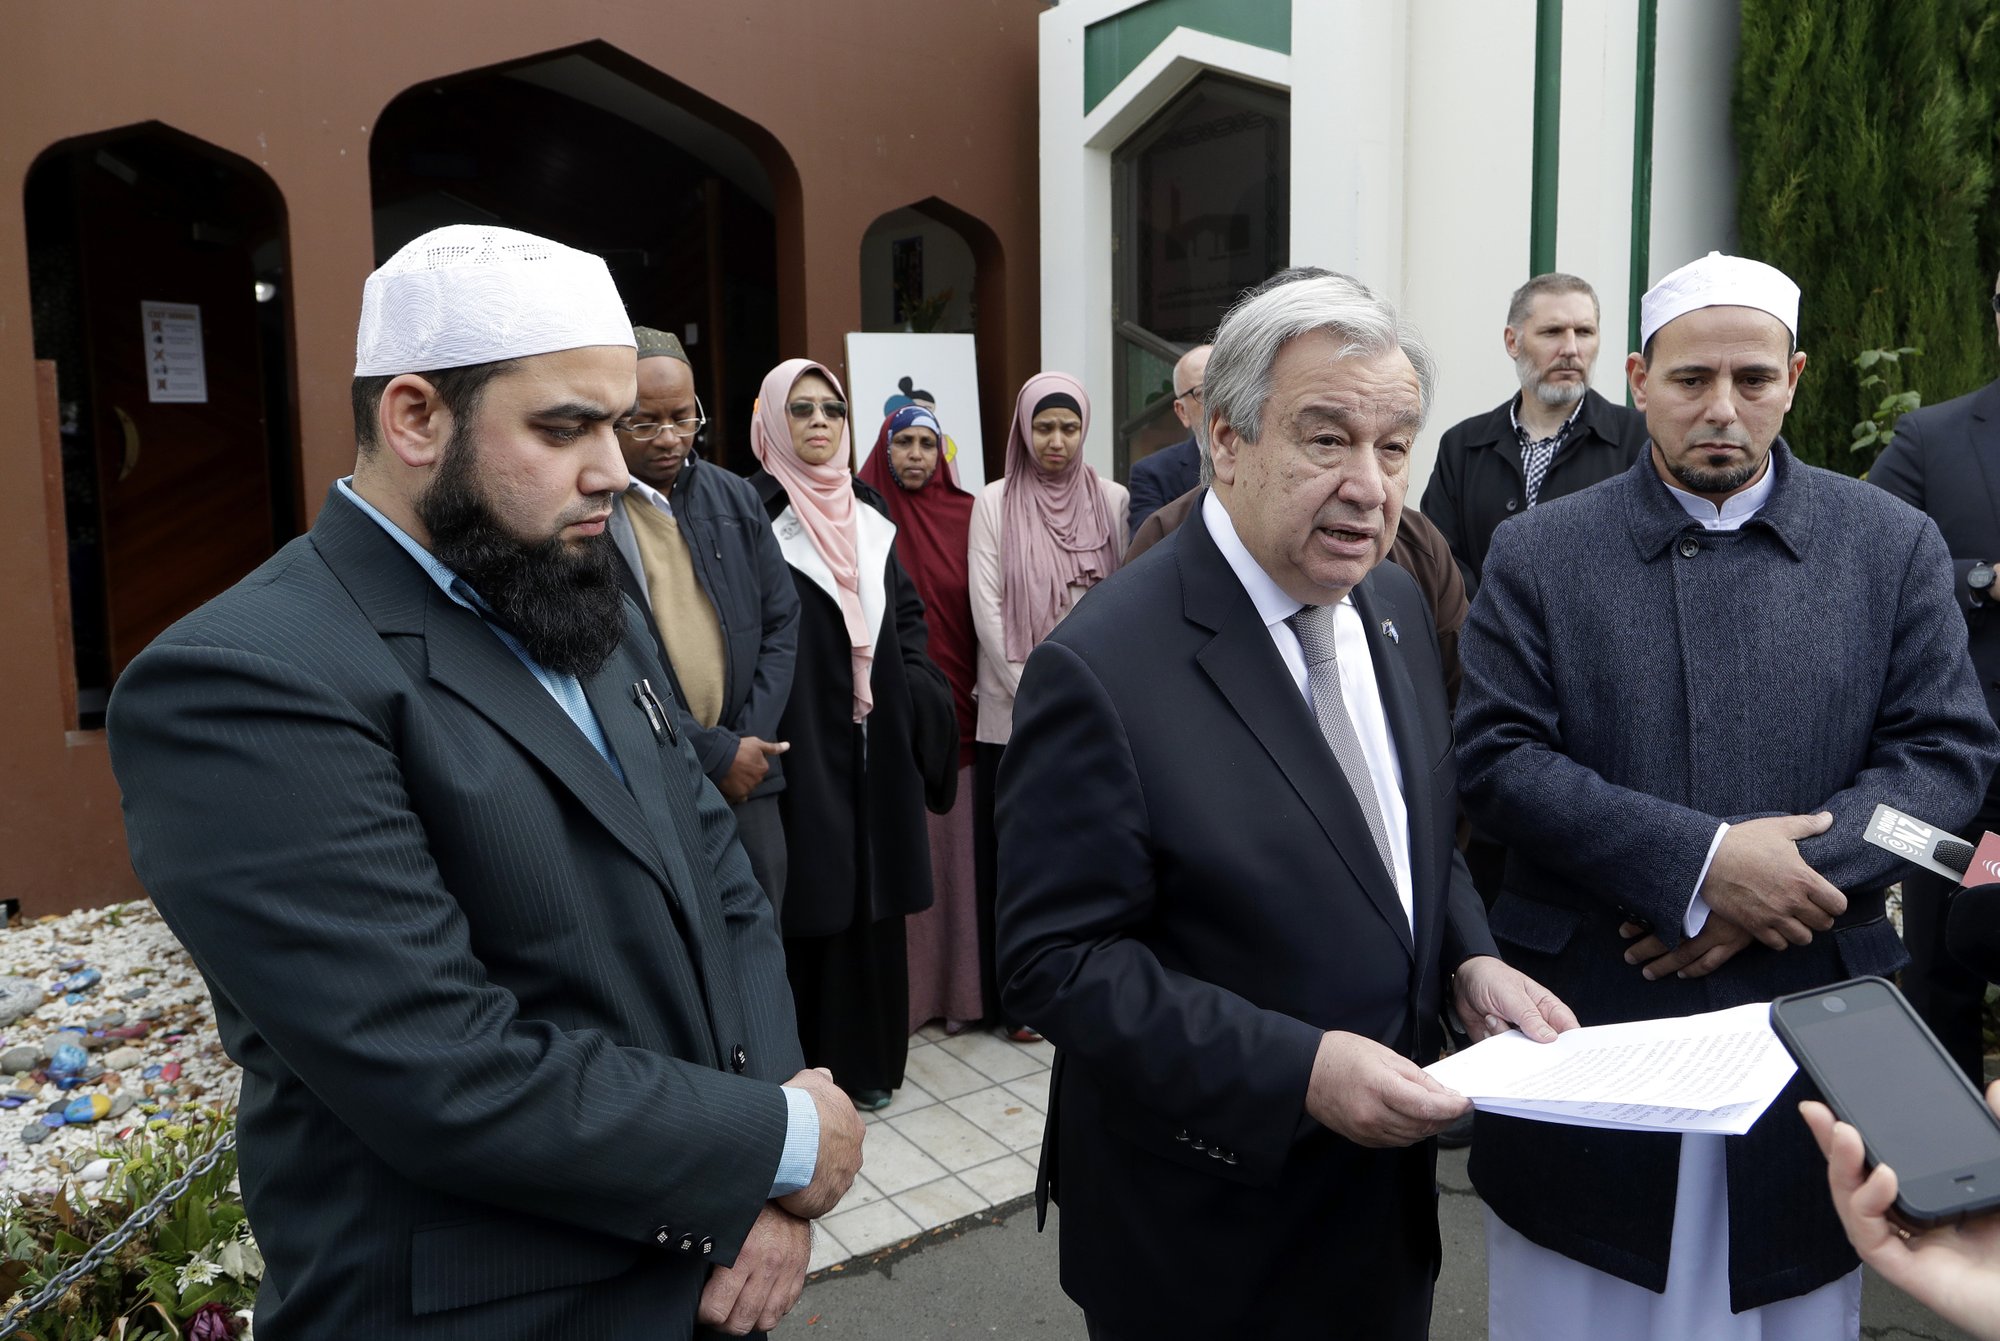 UN leader visits New Zealand mosques where 51 were killed